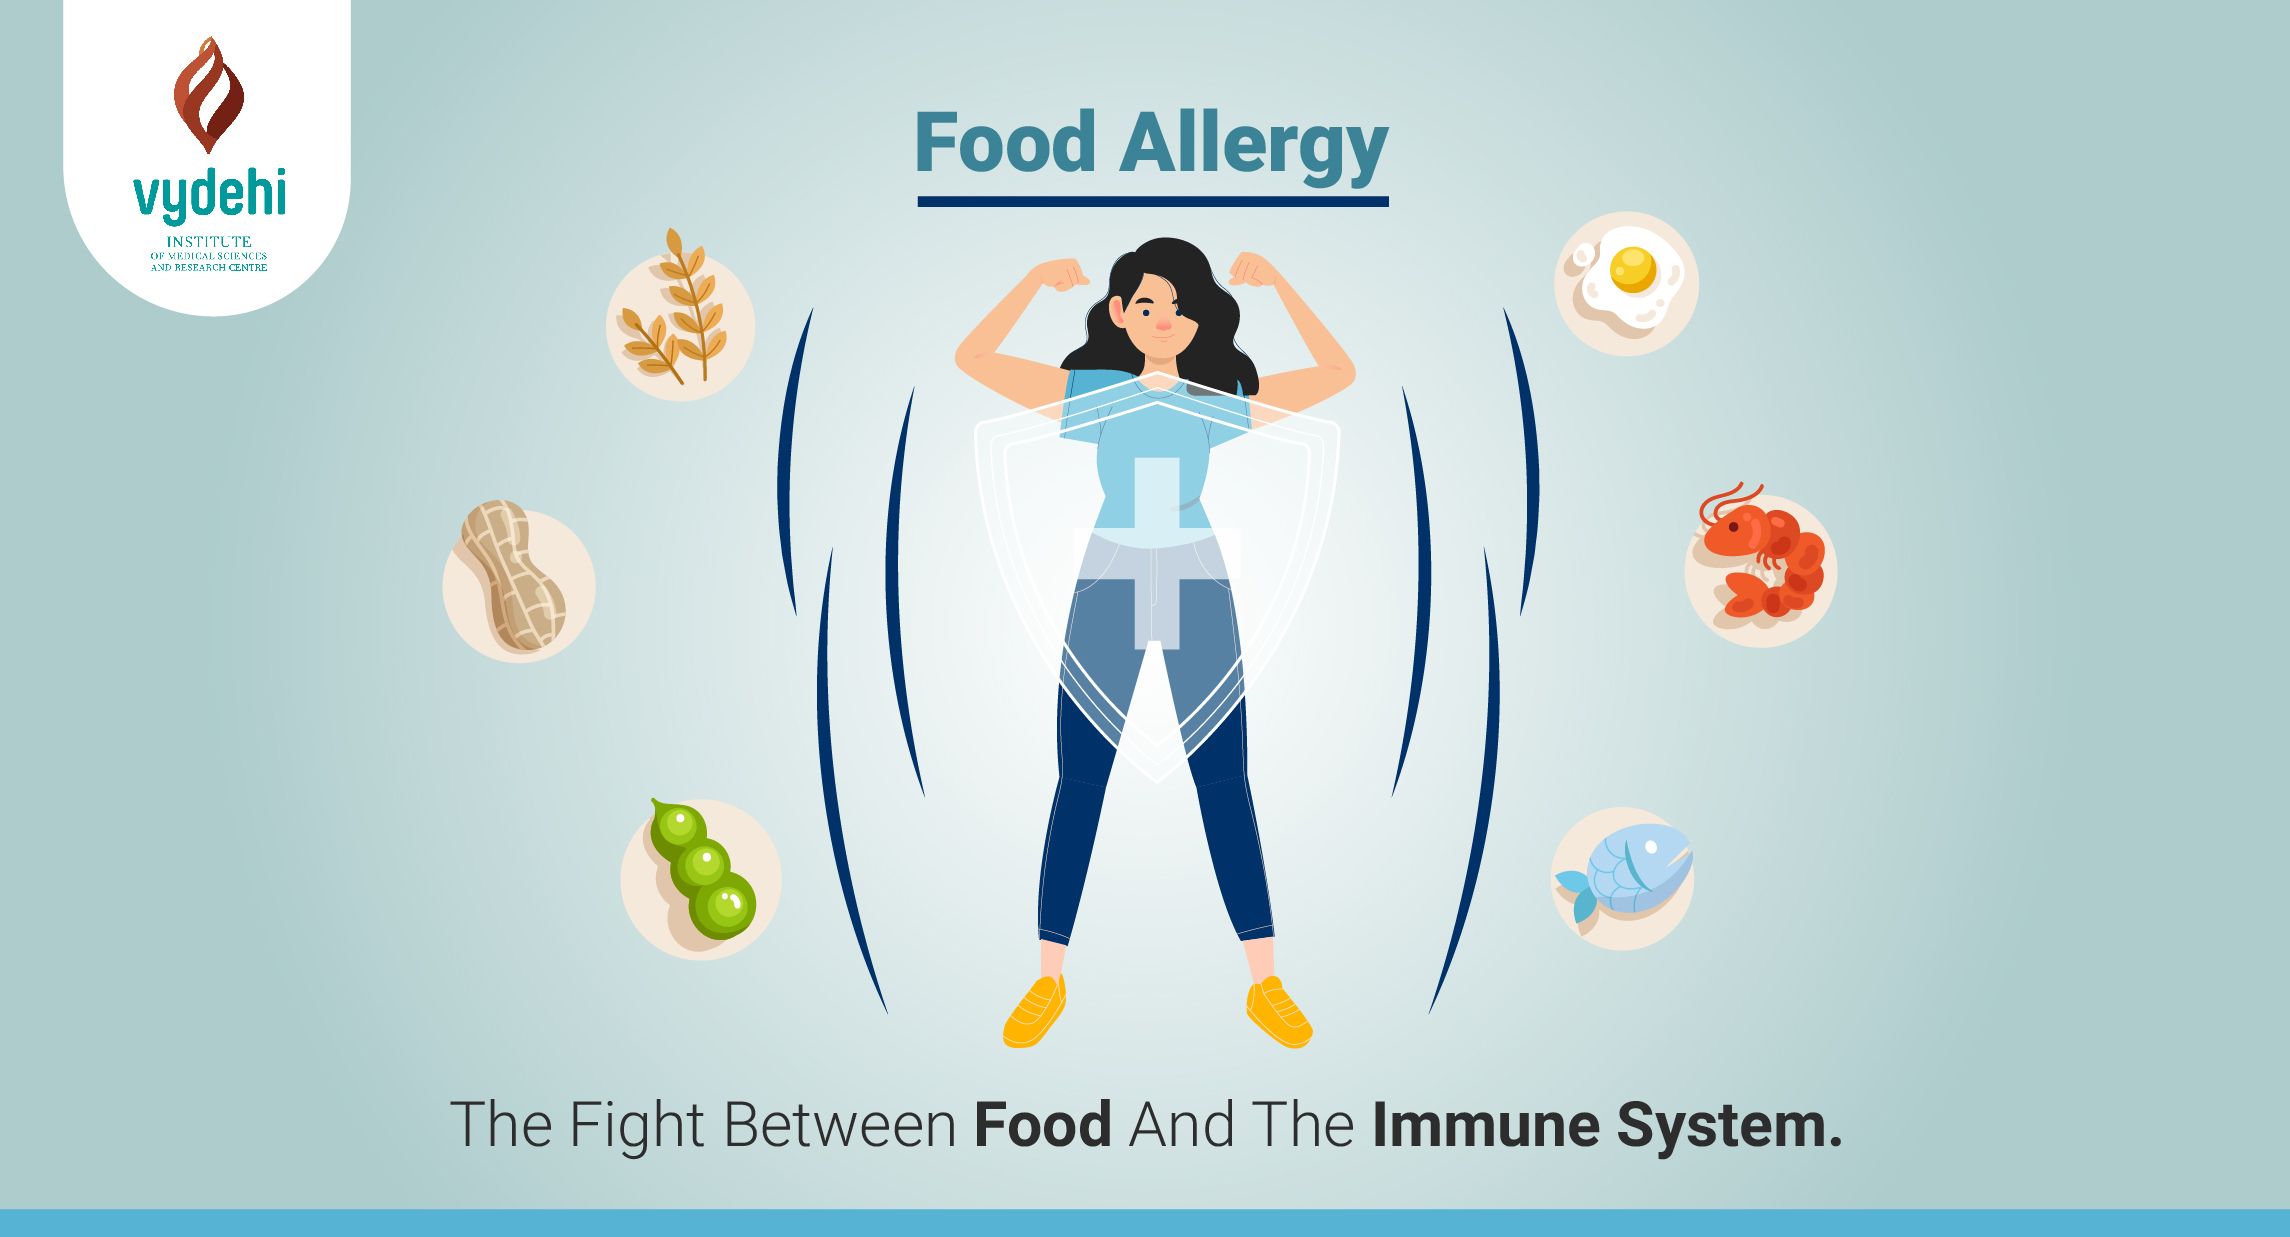 Food Allergy causes, symptoms, treatment, immune system